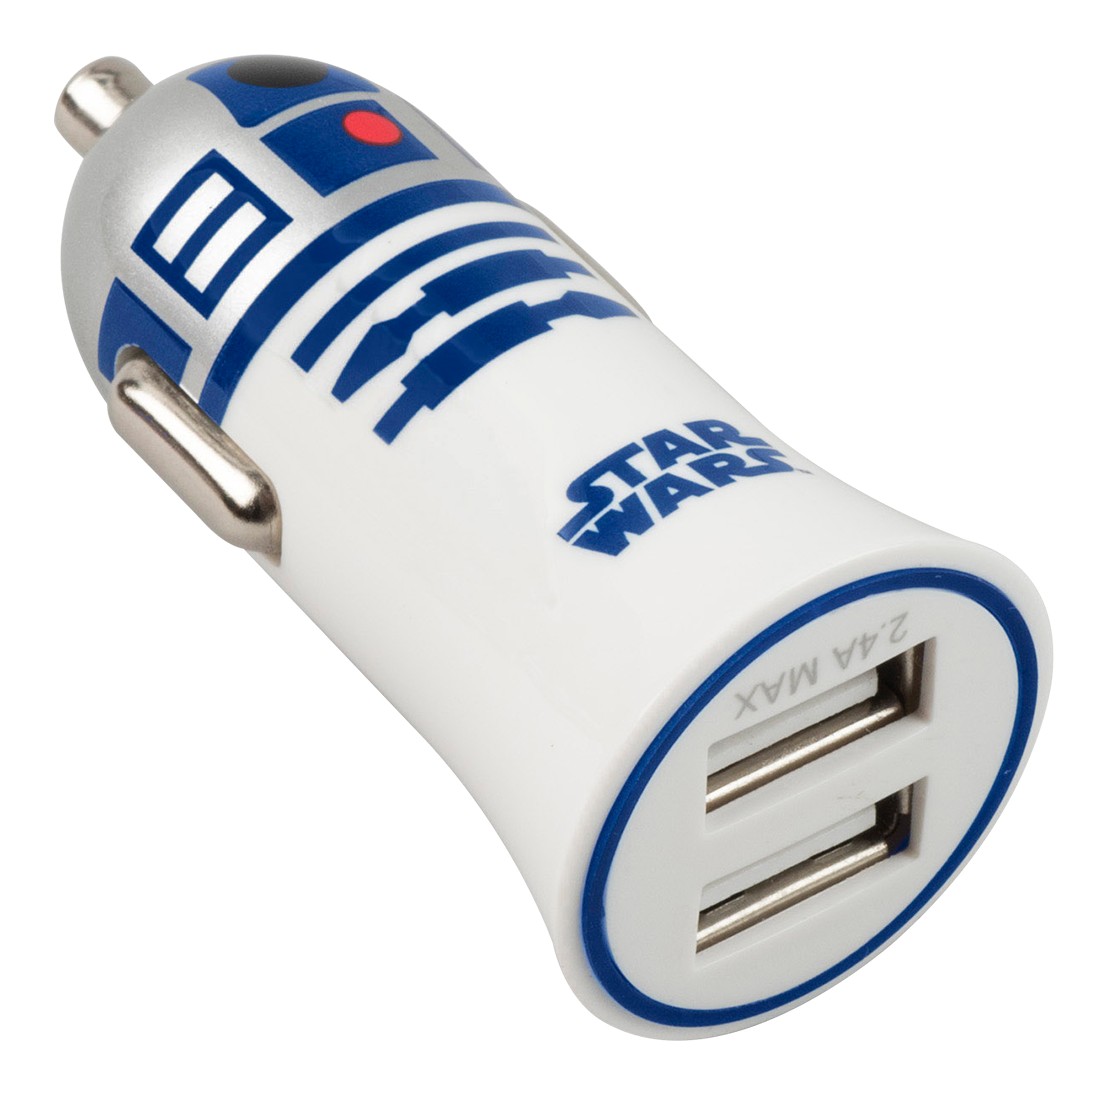 https://avvenice.com/21268/tribe-r2-d2-star-wars-car-charger-fast-car-charge-double-usb-charger-iphone-ipad-tablet-samsung-smartphone.jpg